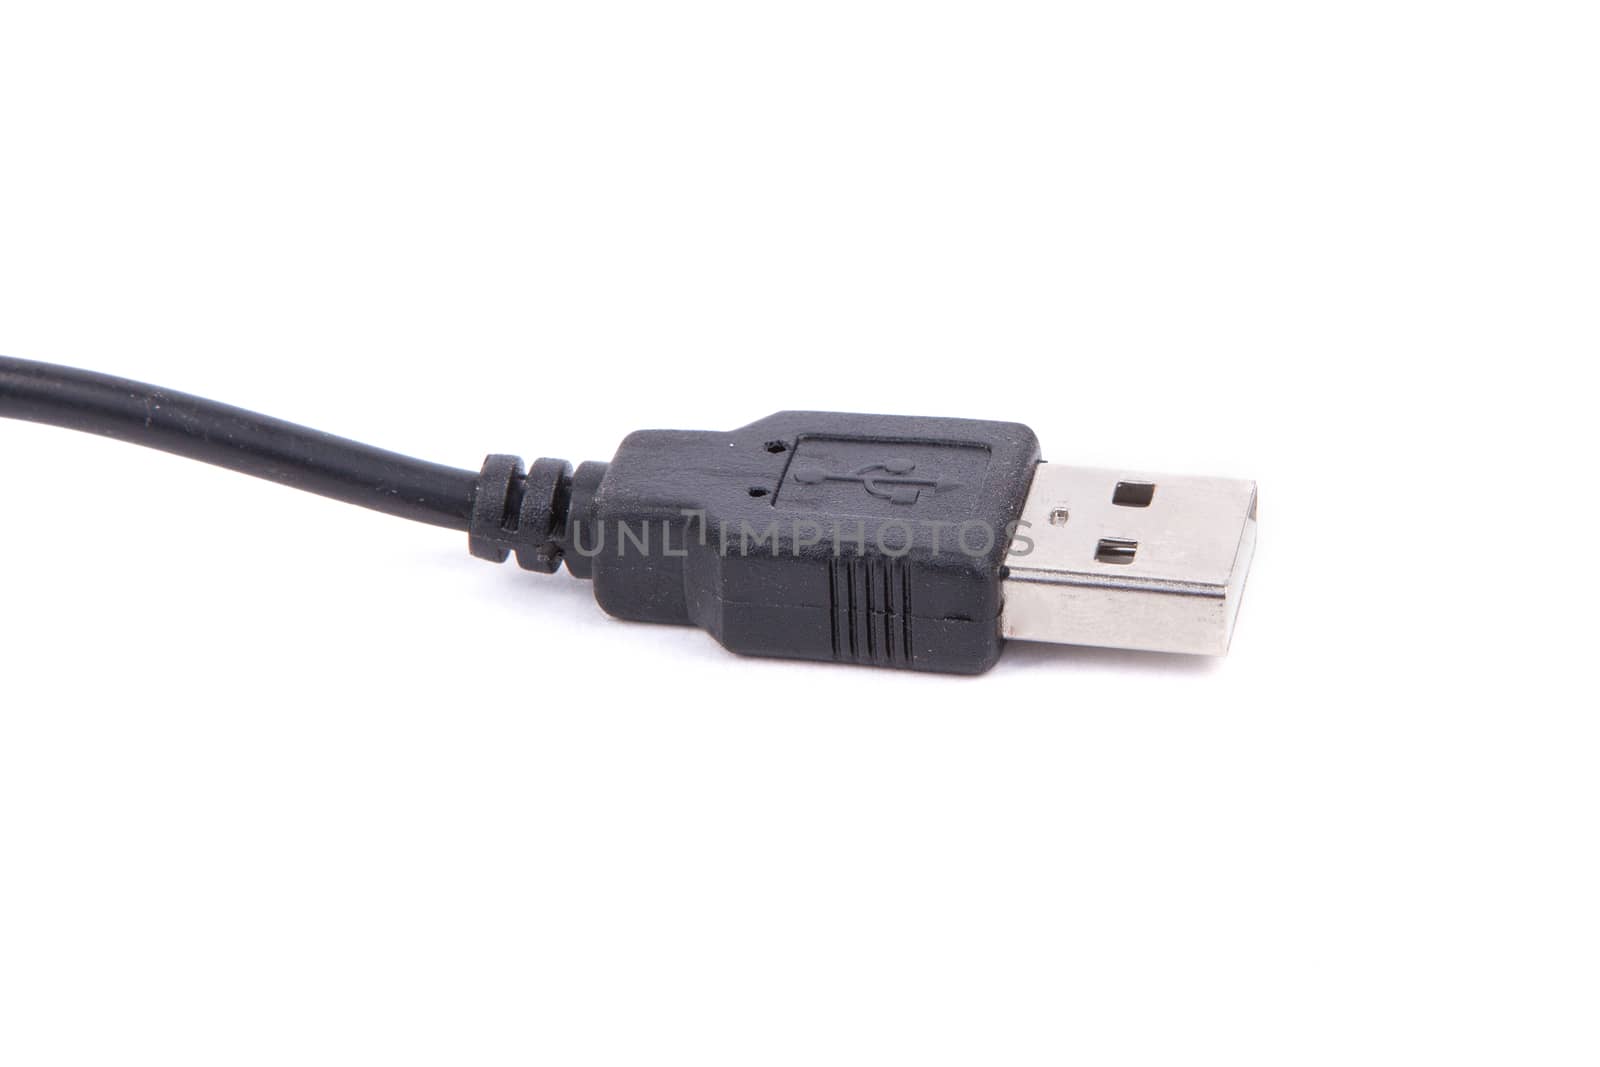 usb cable on an isolated white background by traza